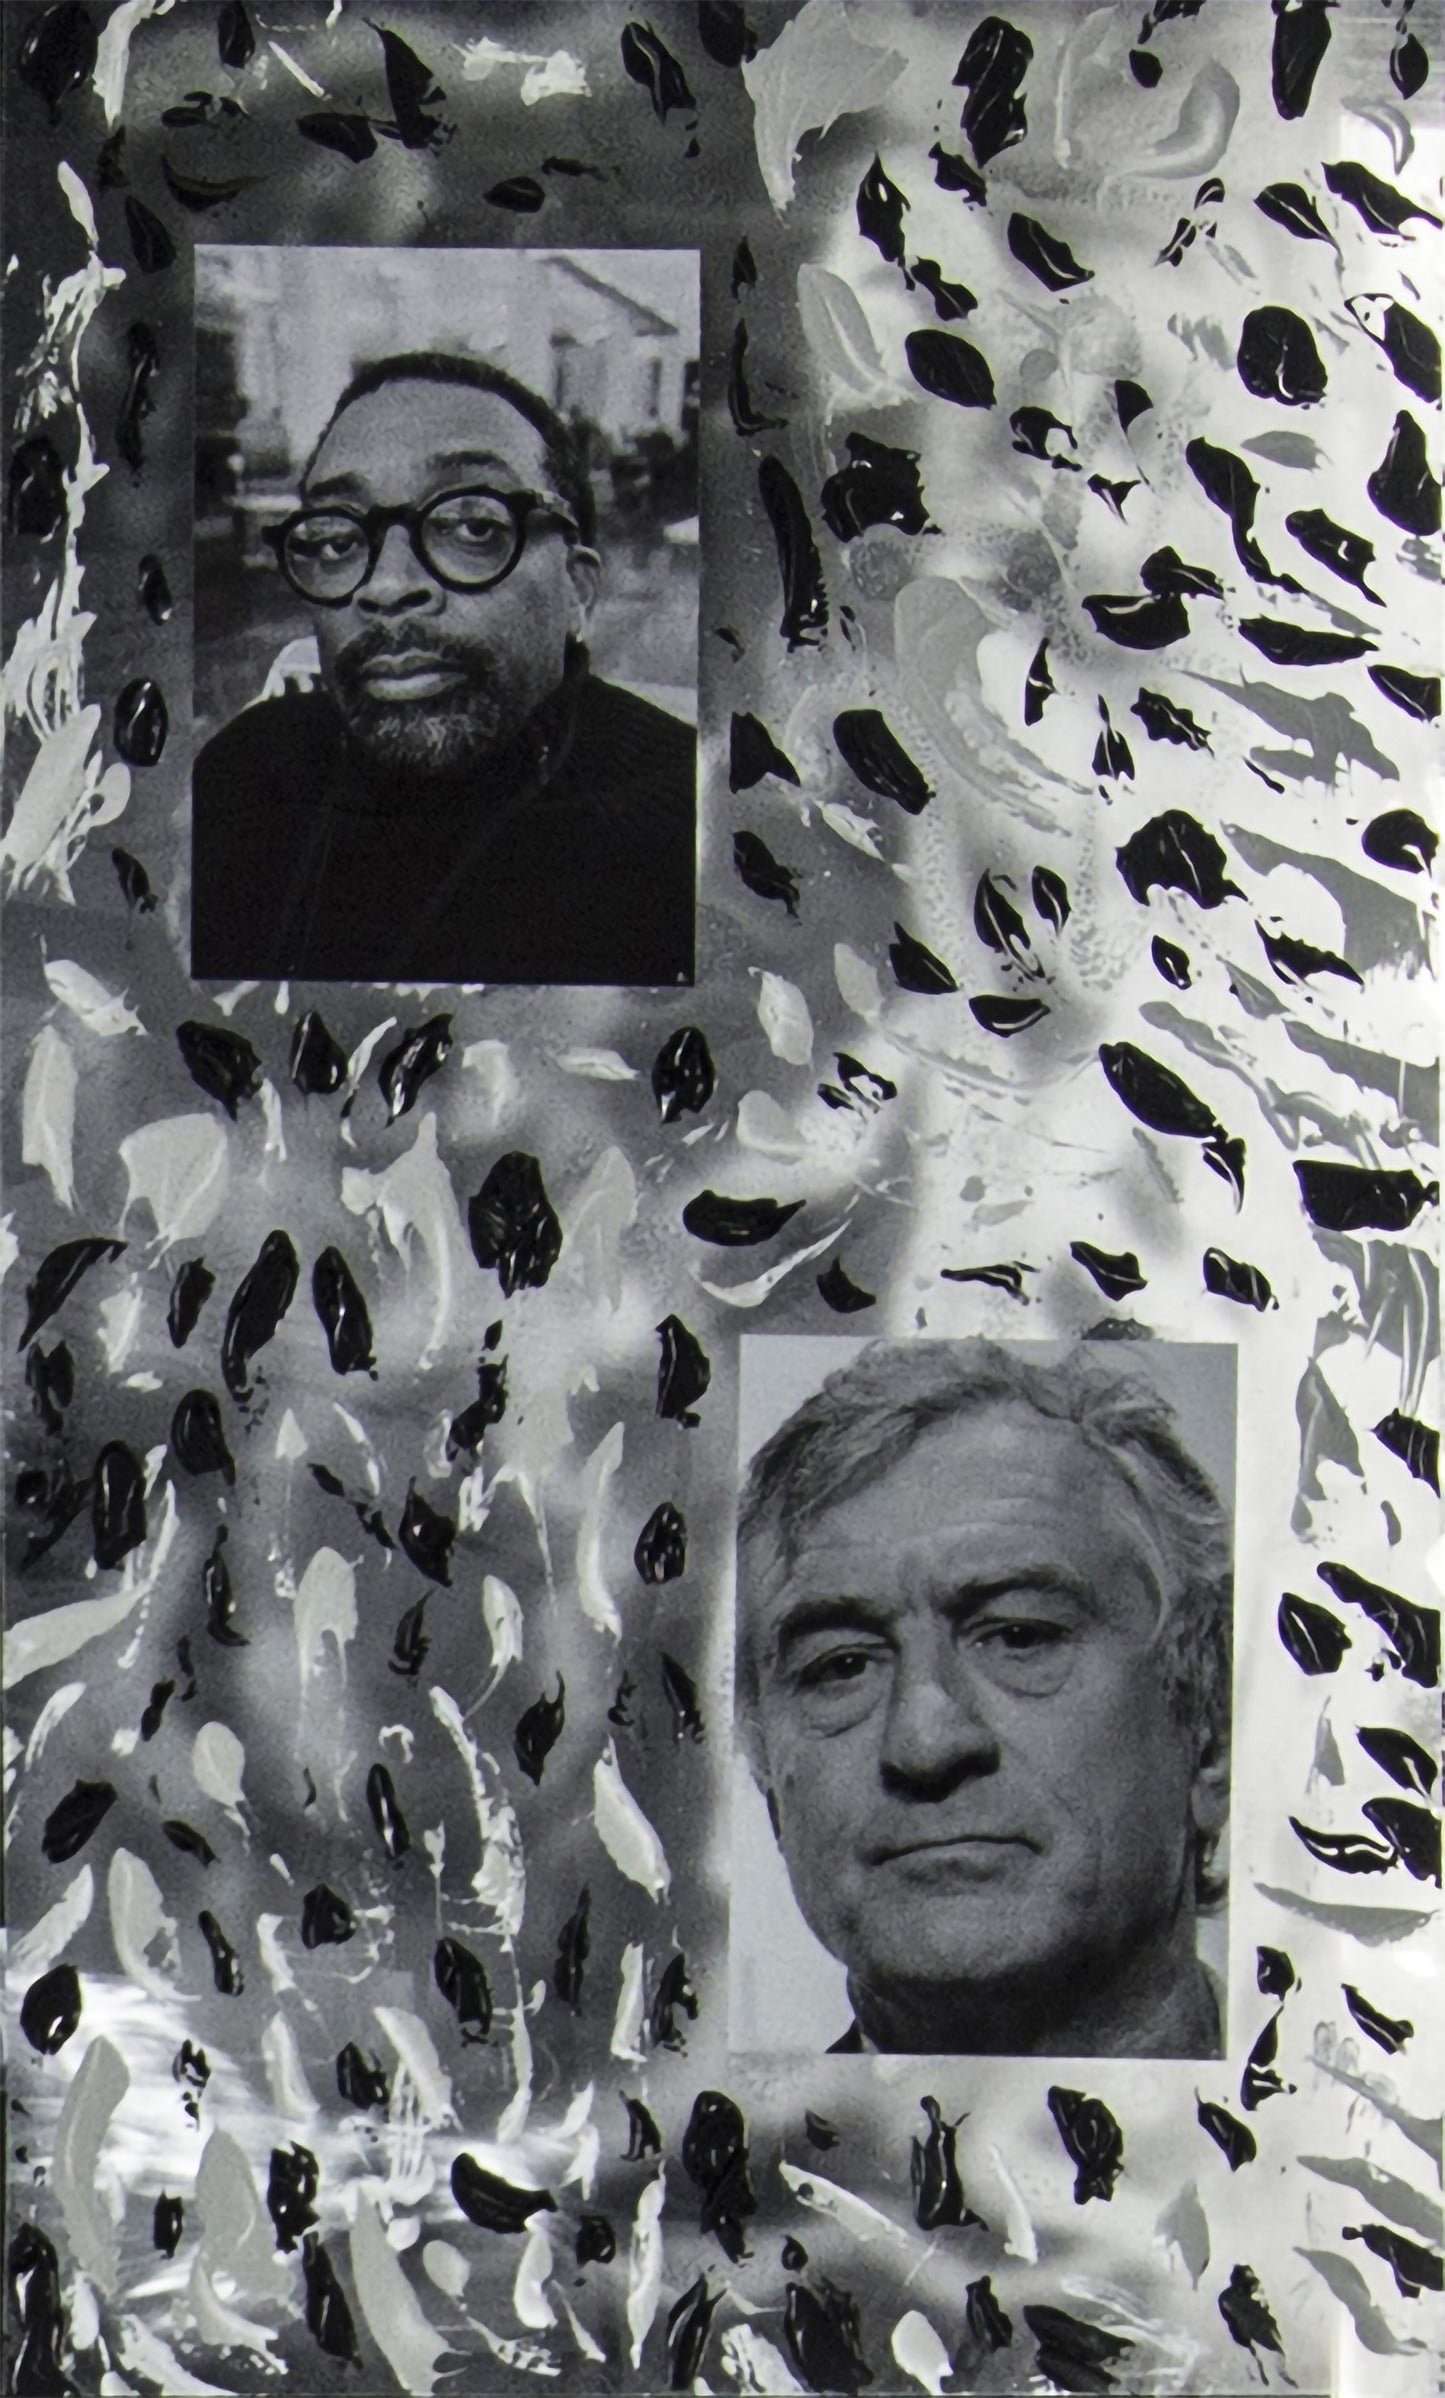 Photography (Robert De Niro and Spike Lee), acrylic, and knife on plexiglass, NEW YORK BLACK AND WHITE (2022)